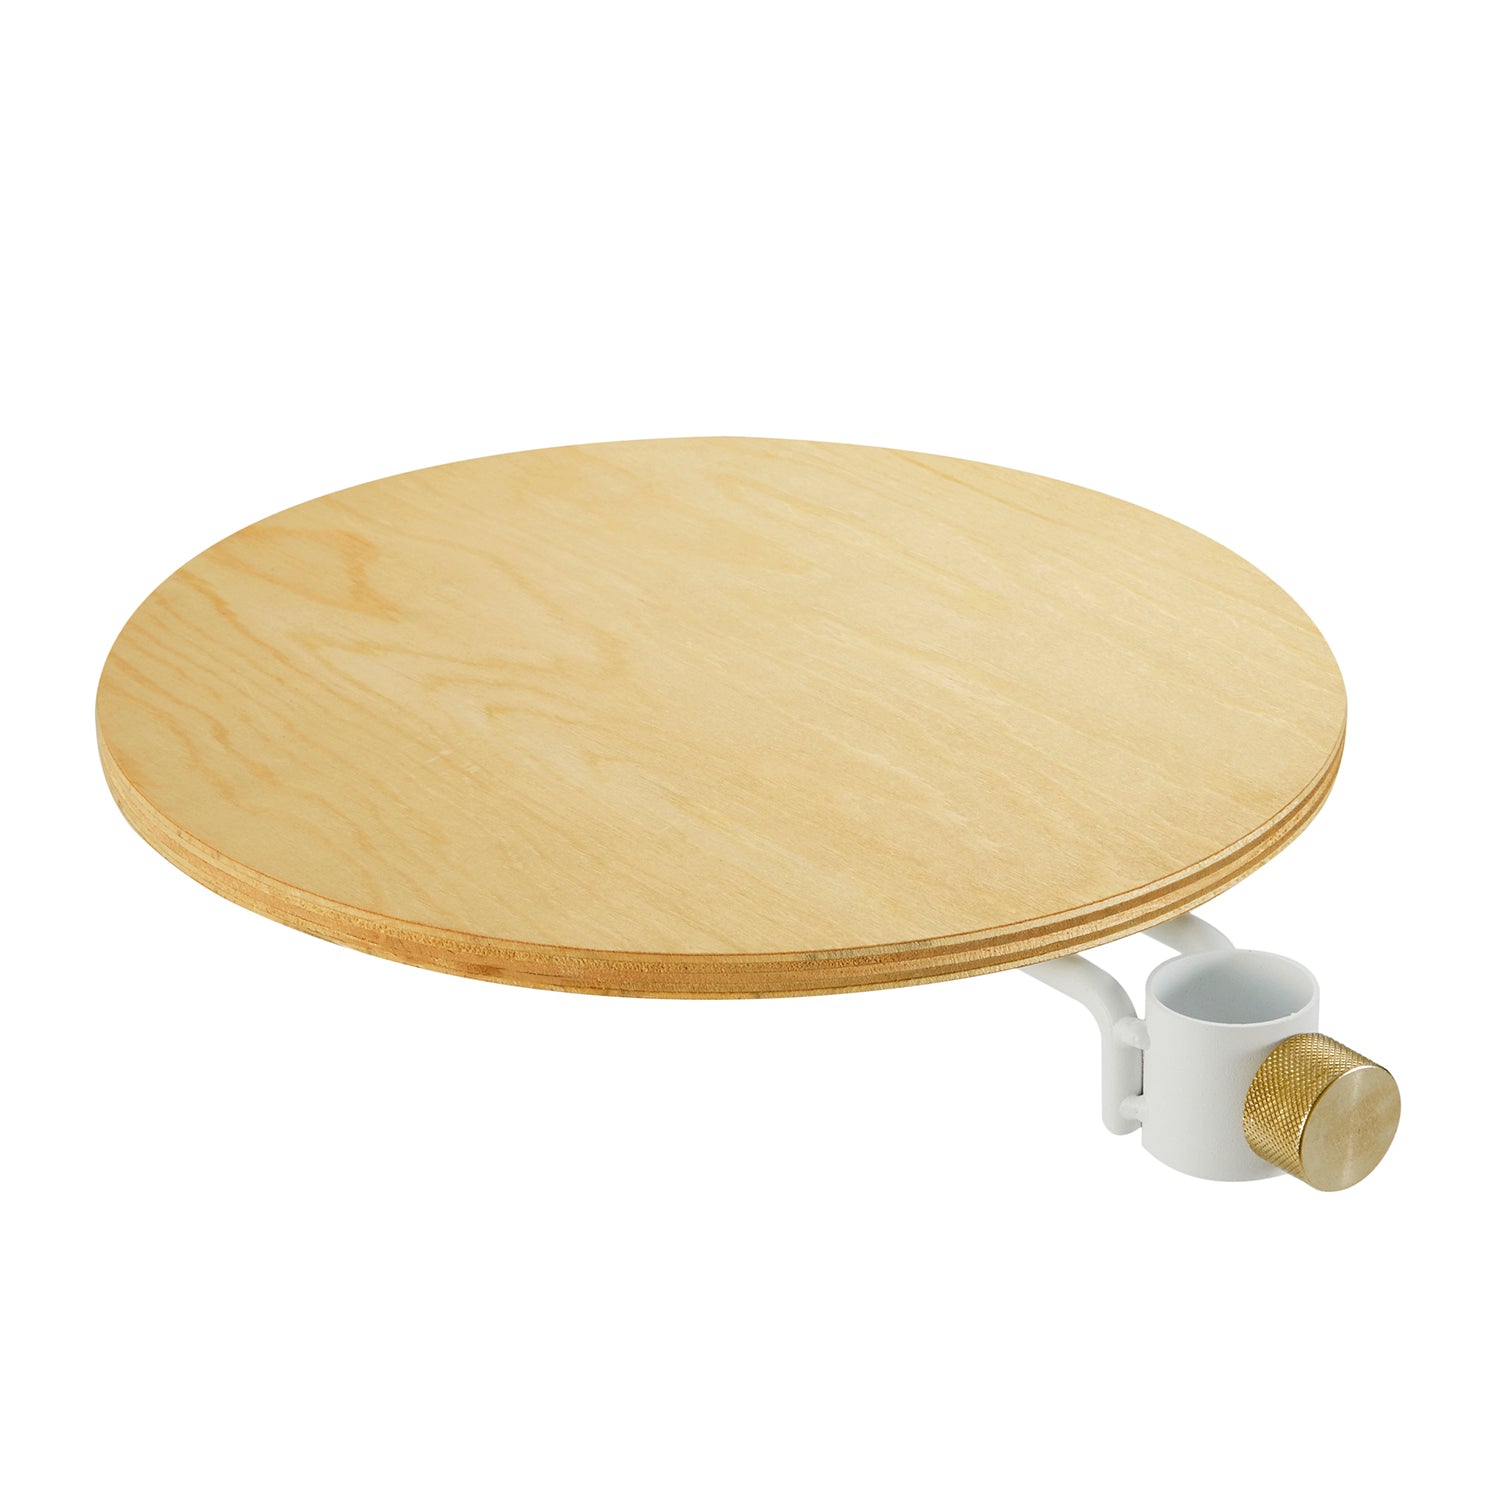 Table A White 縦取付 D-TA-WH｜平安伸銅工業オンラインショップ